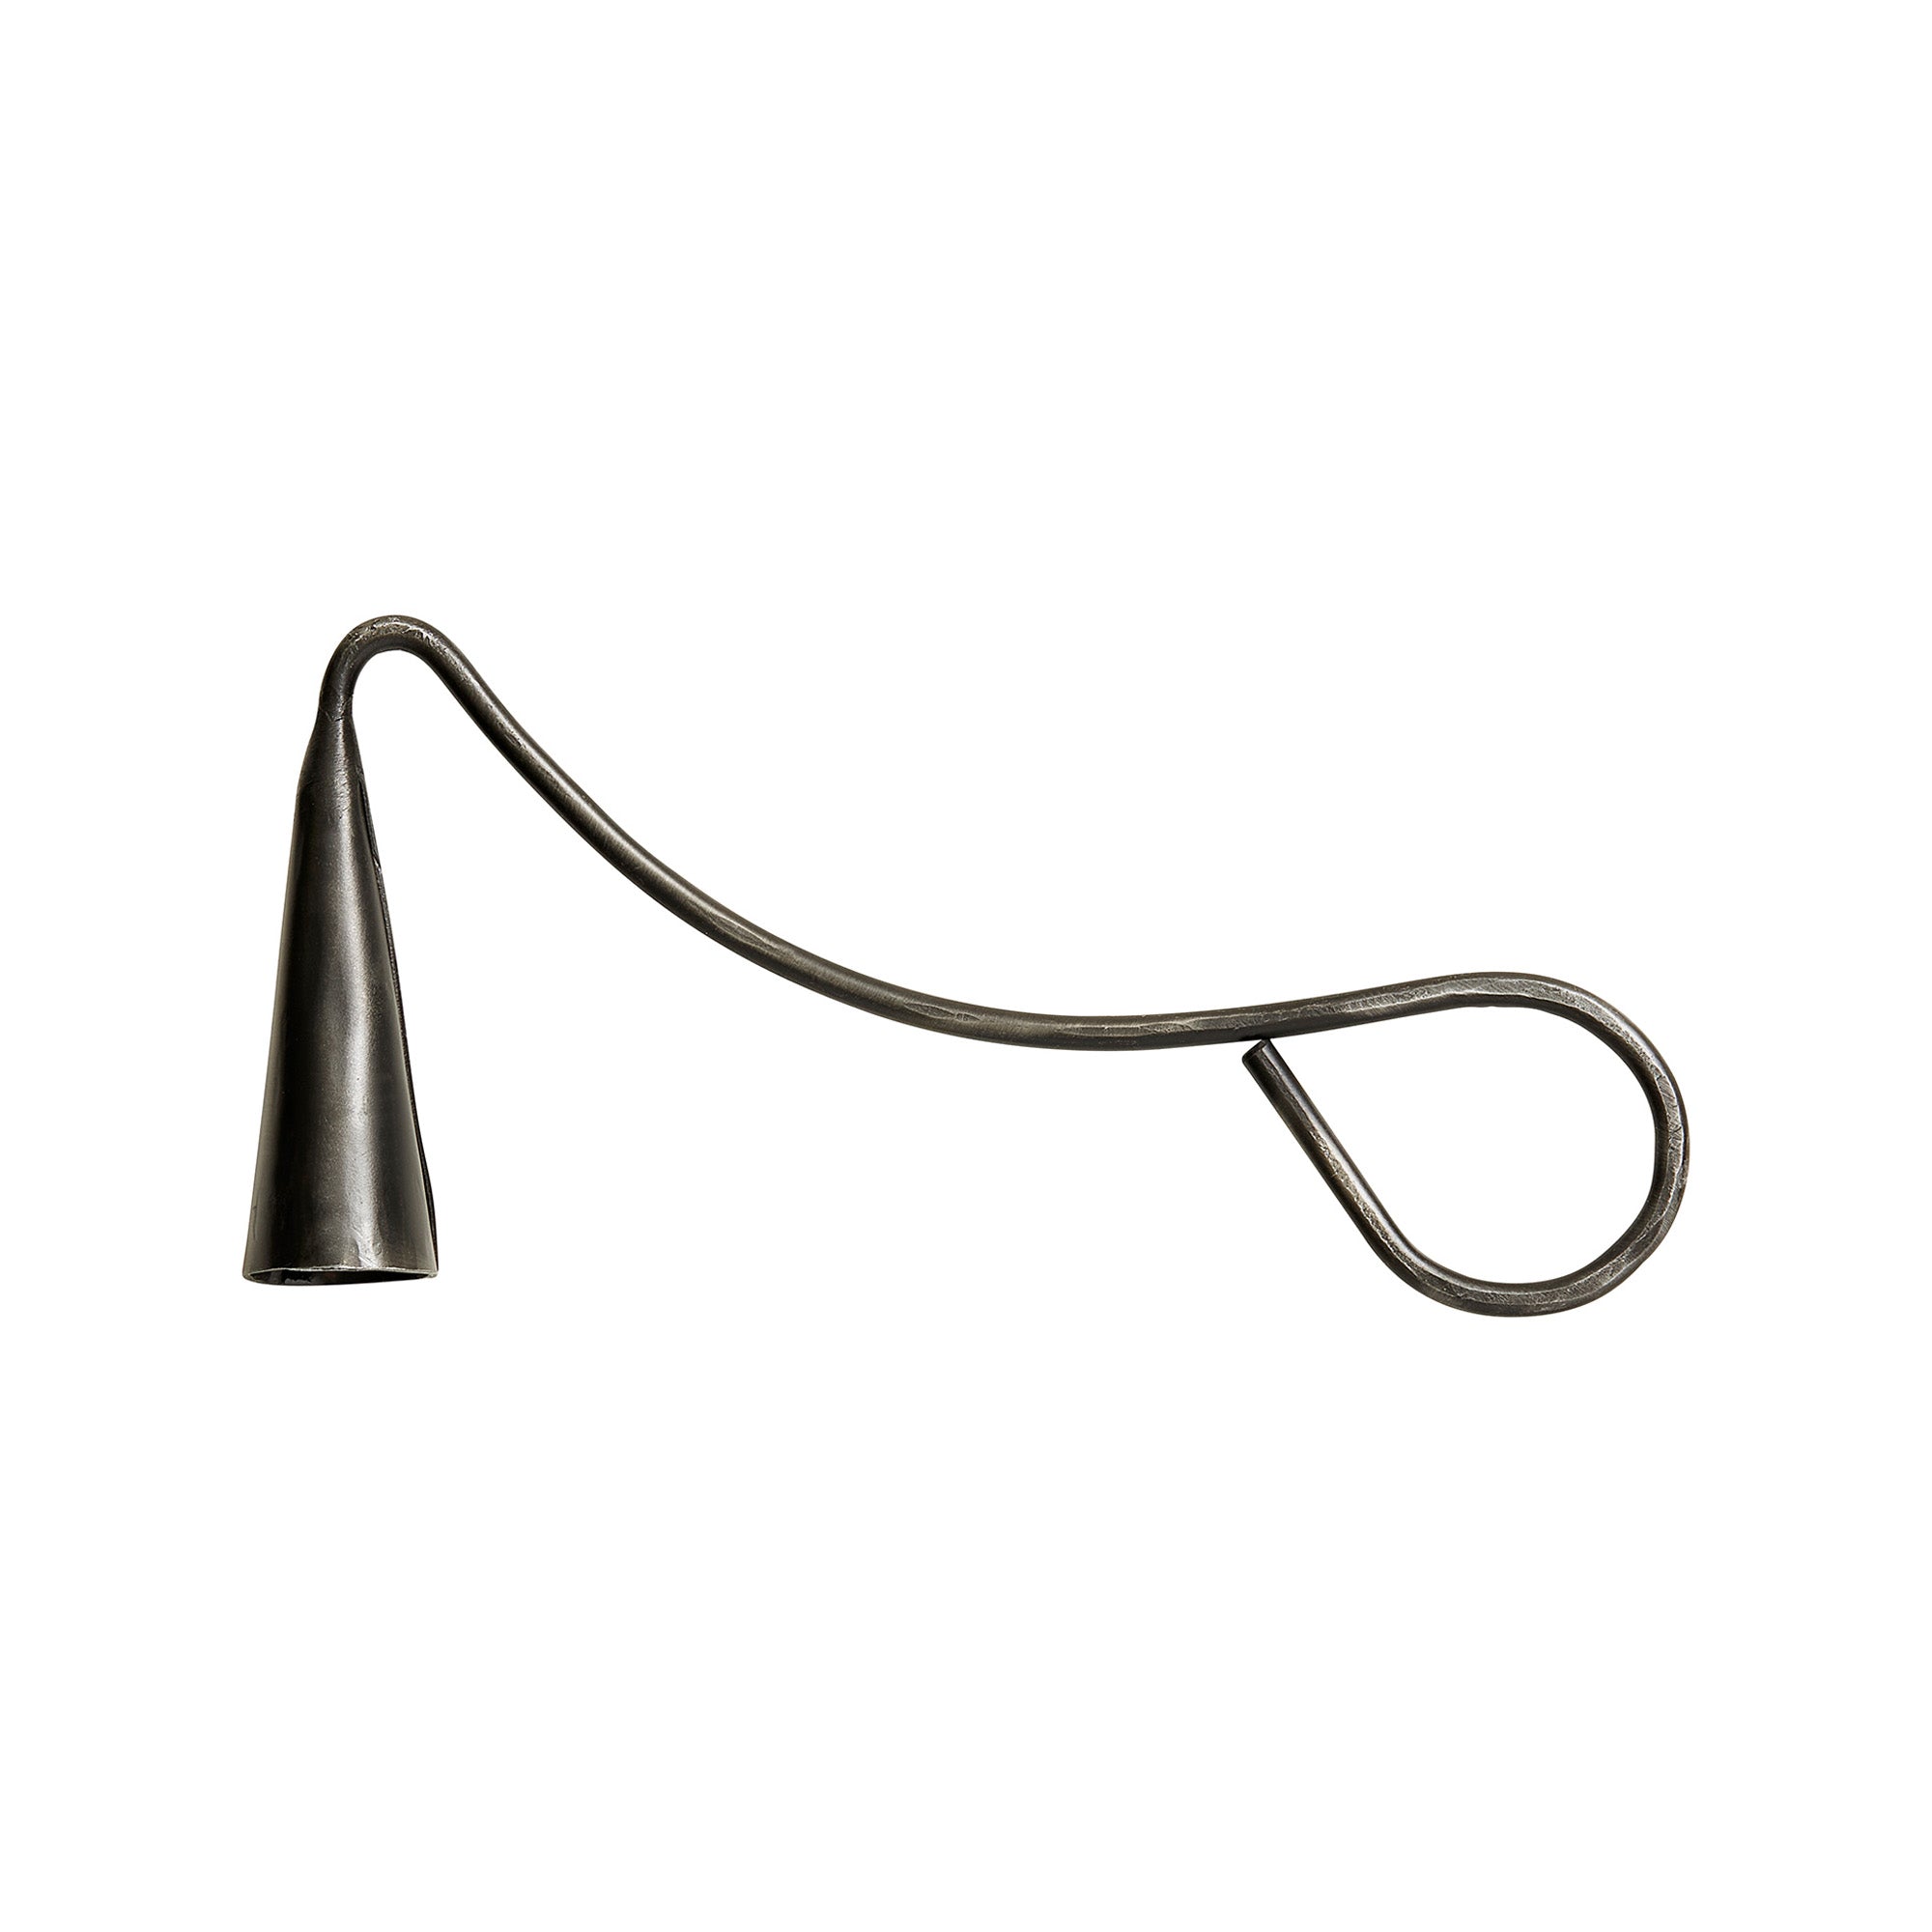 Taava Candle Snuffer